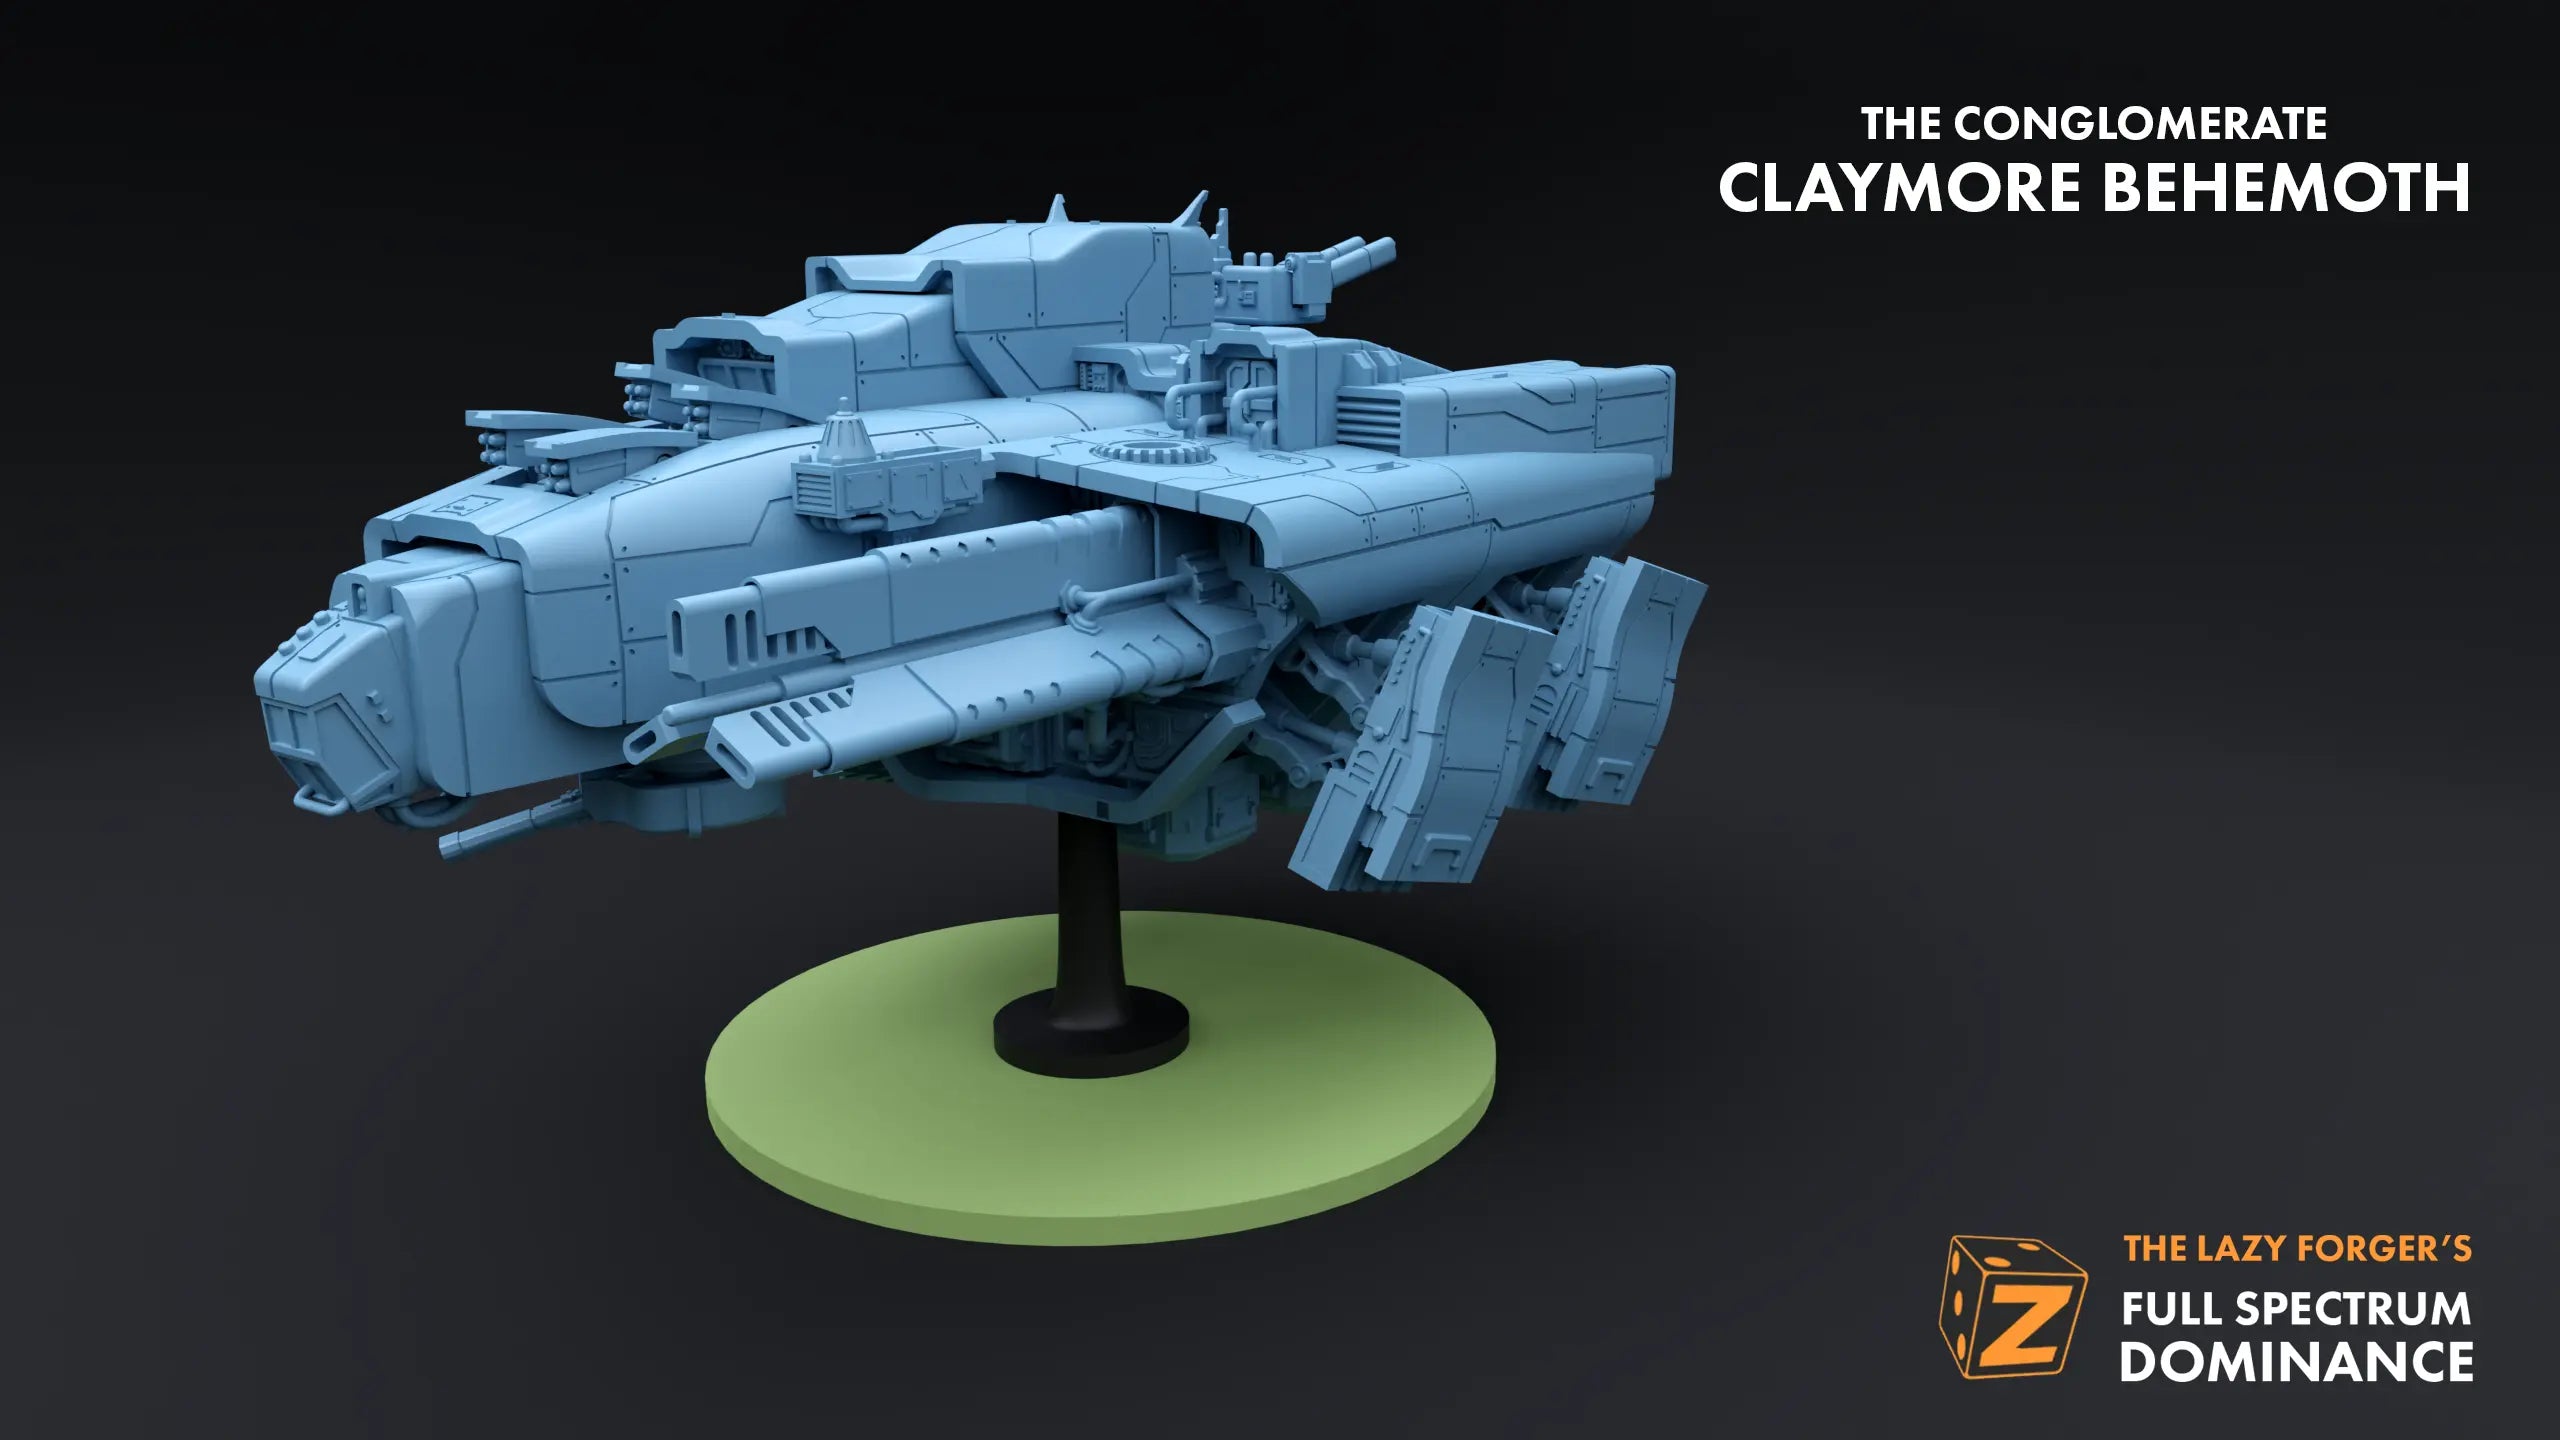 Claymore Behemoth - The Conglomerate The Lazy Forger